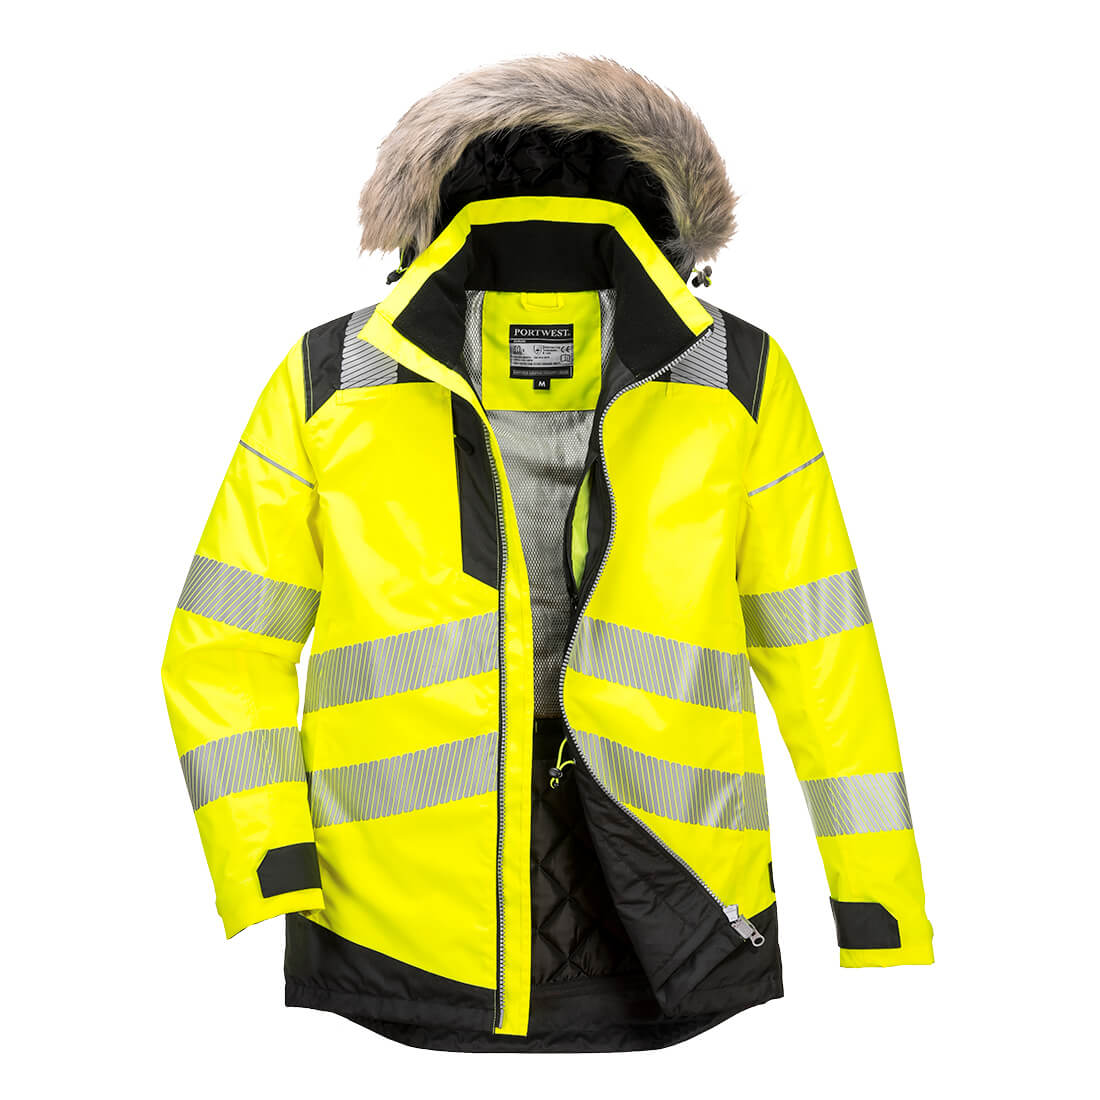 High Visibility, Insulated Jackets